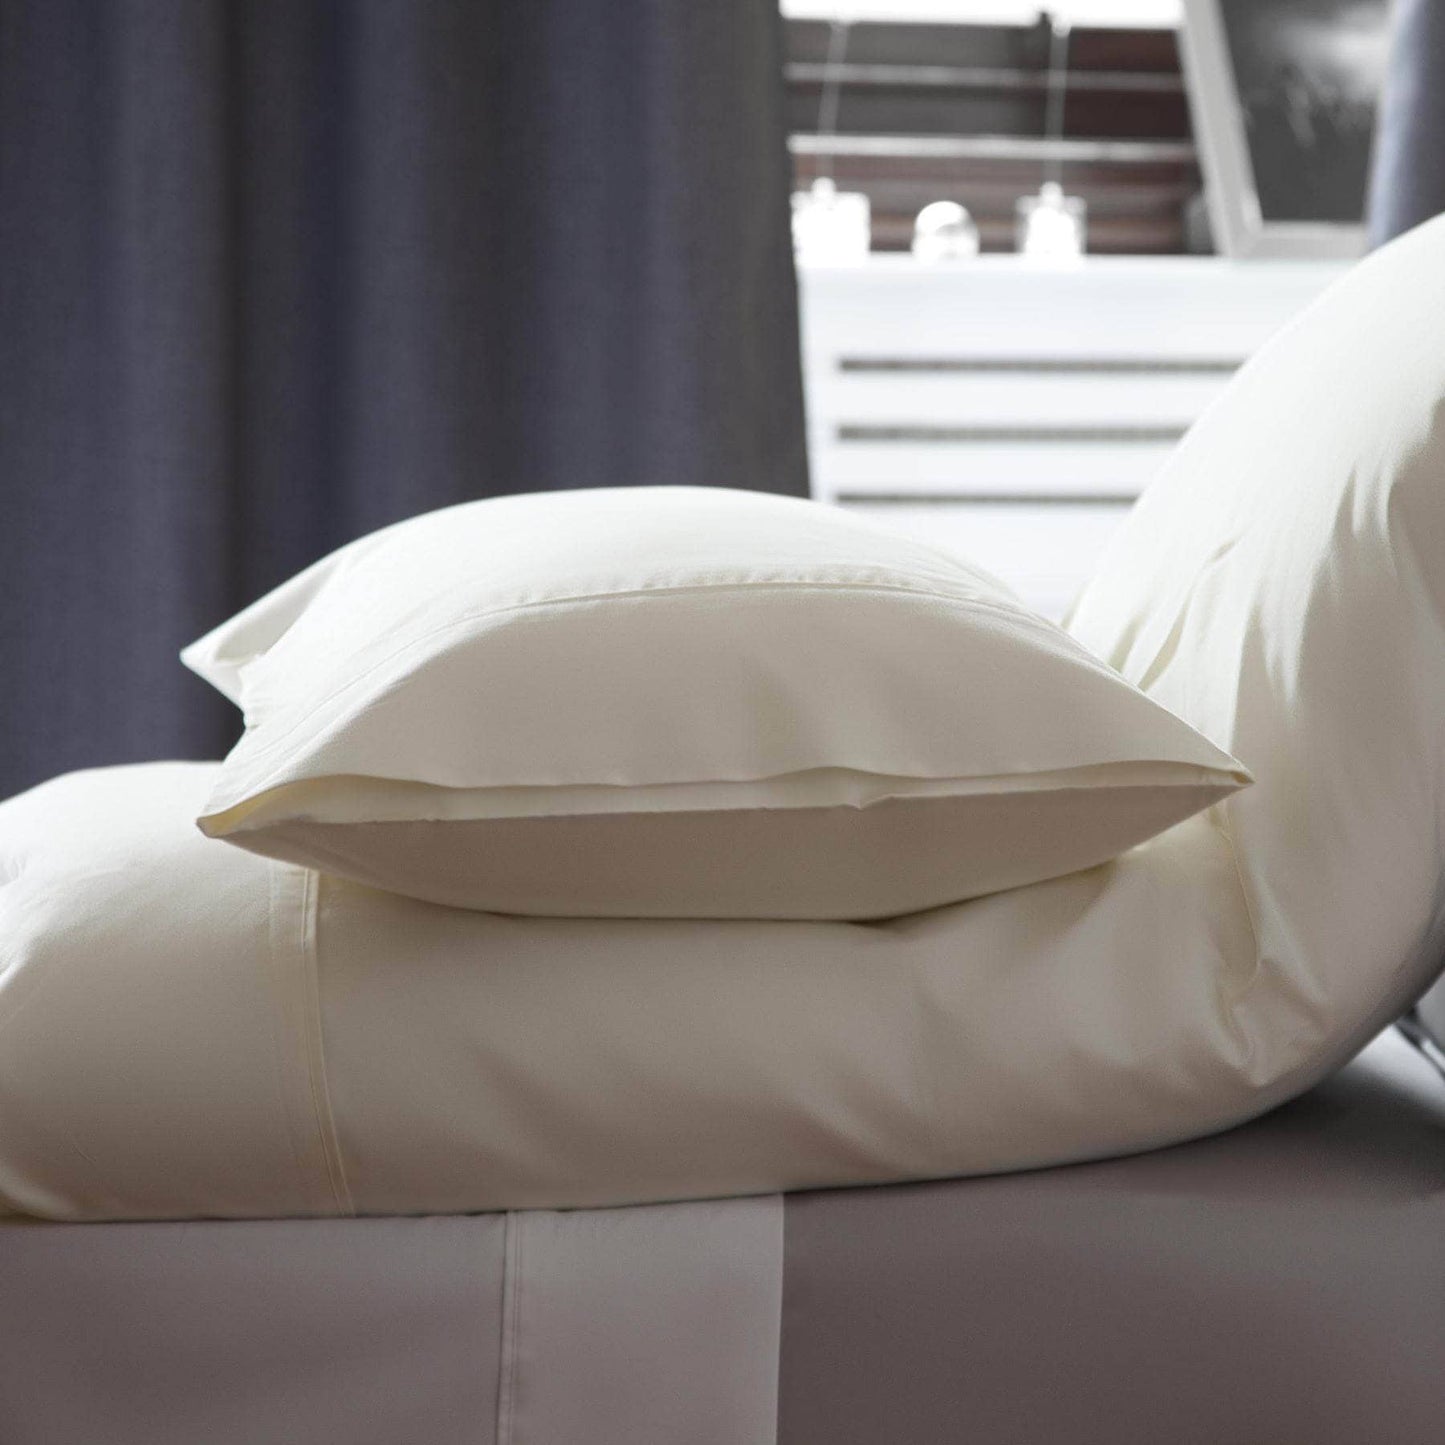 Homeware  -  Premium Blend Ivory Fitted Sheet  - 